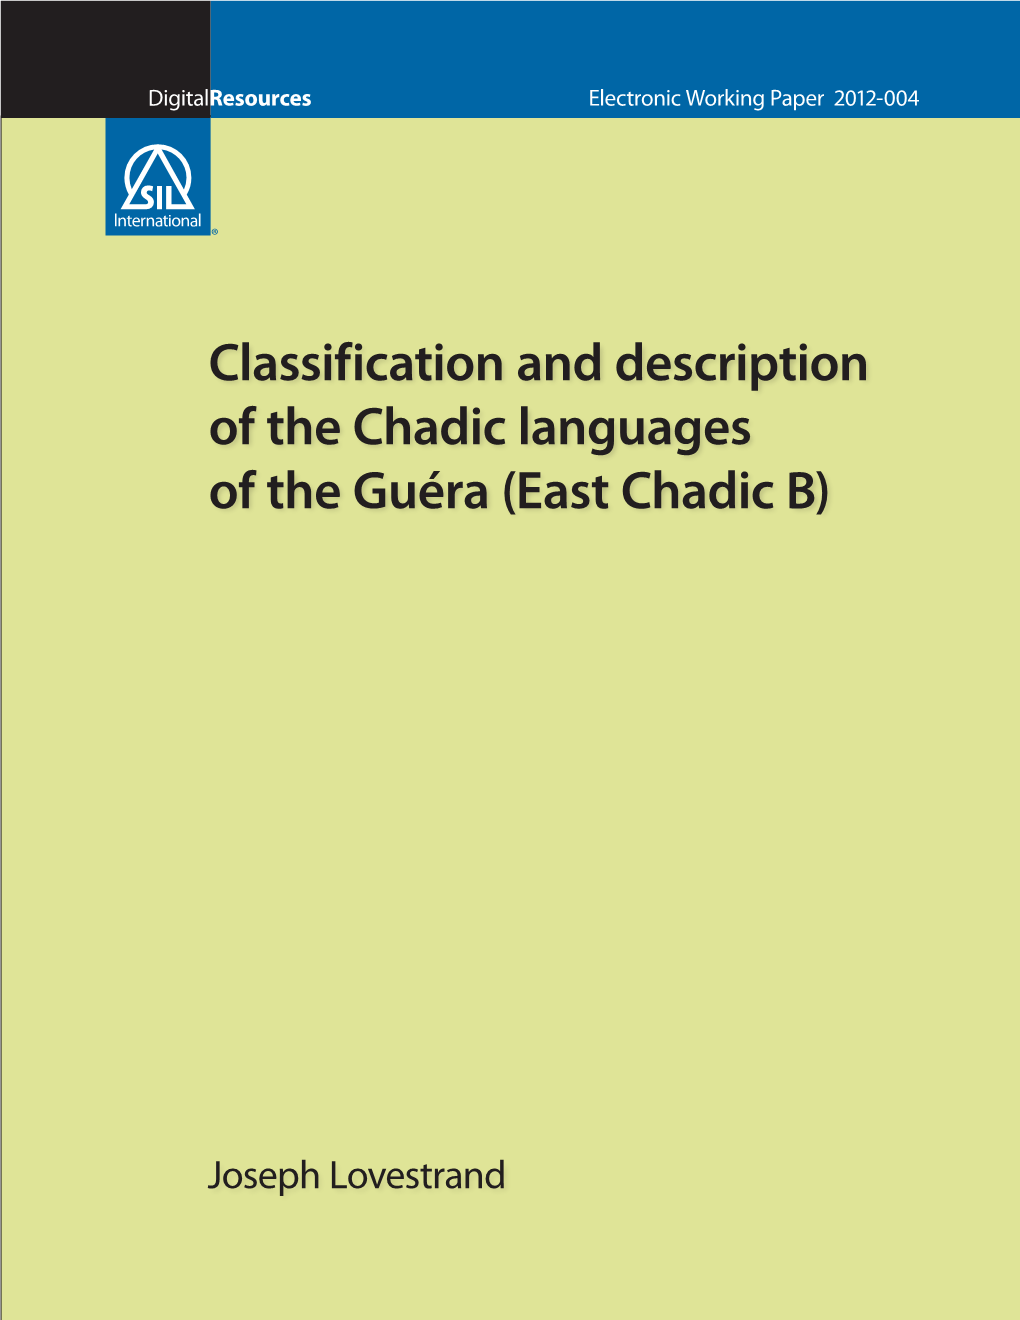 Classification and Description of the Chadic Languages of the Guéra (East Chadic B)